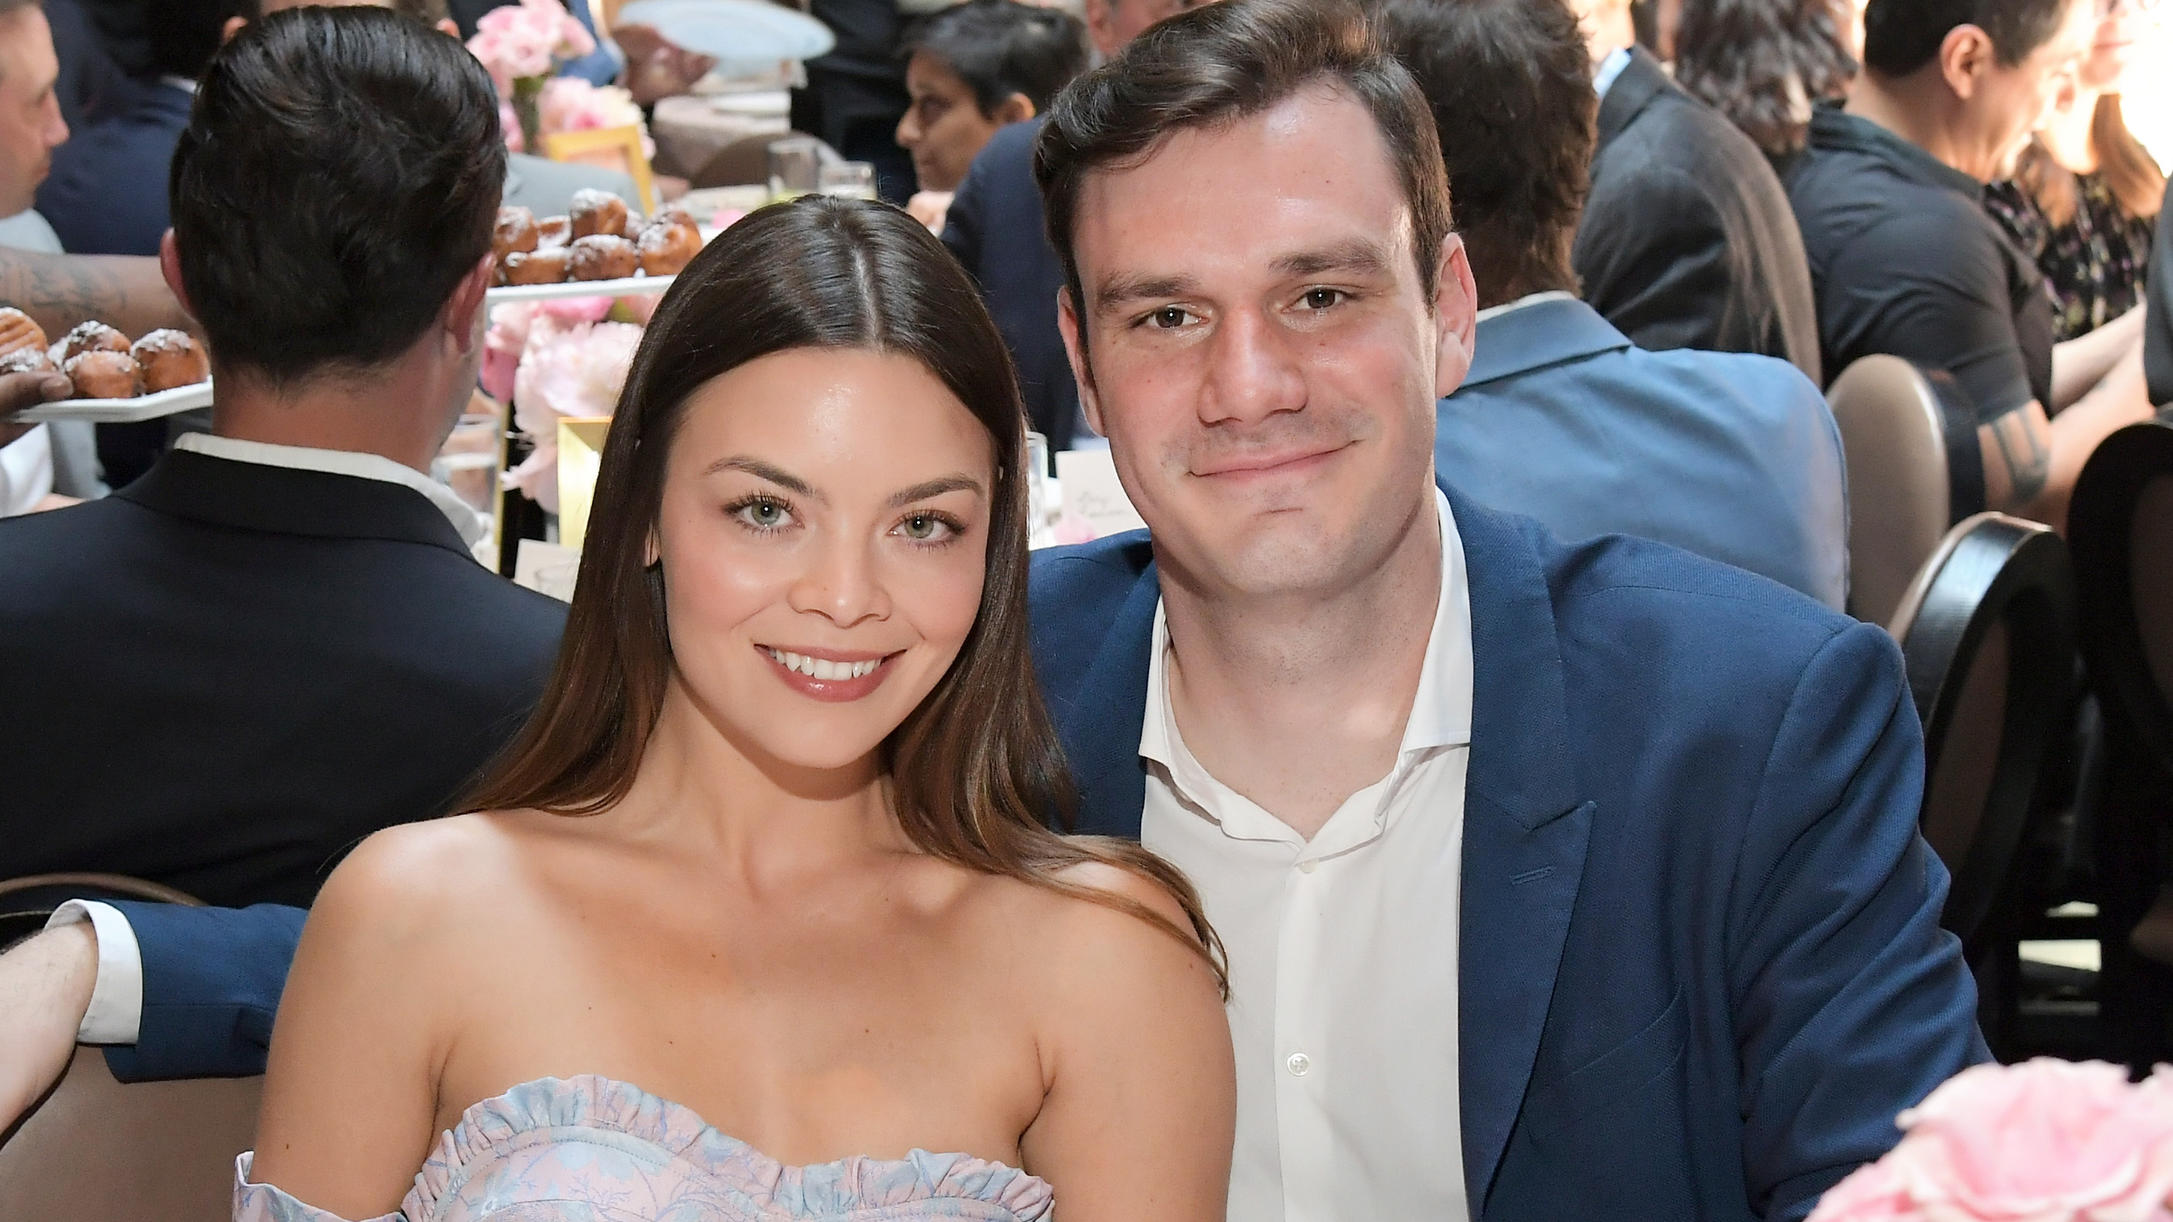 LOS ANGELES, CA - MAY 04:  Scarlett Byrne (L) and Playboy Chief Creative Officer Cooper Hefner attend Playboy's 2018 Playmate of the Year Celebration at Beauty & Essex on May 4, 2018 in Los Angeles, California.  (Photo by Charley Gallay/Getty Images 